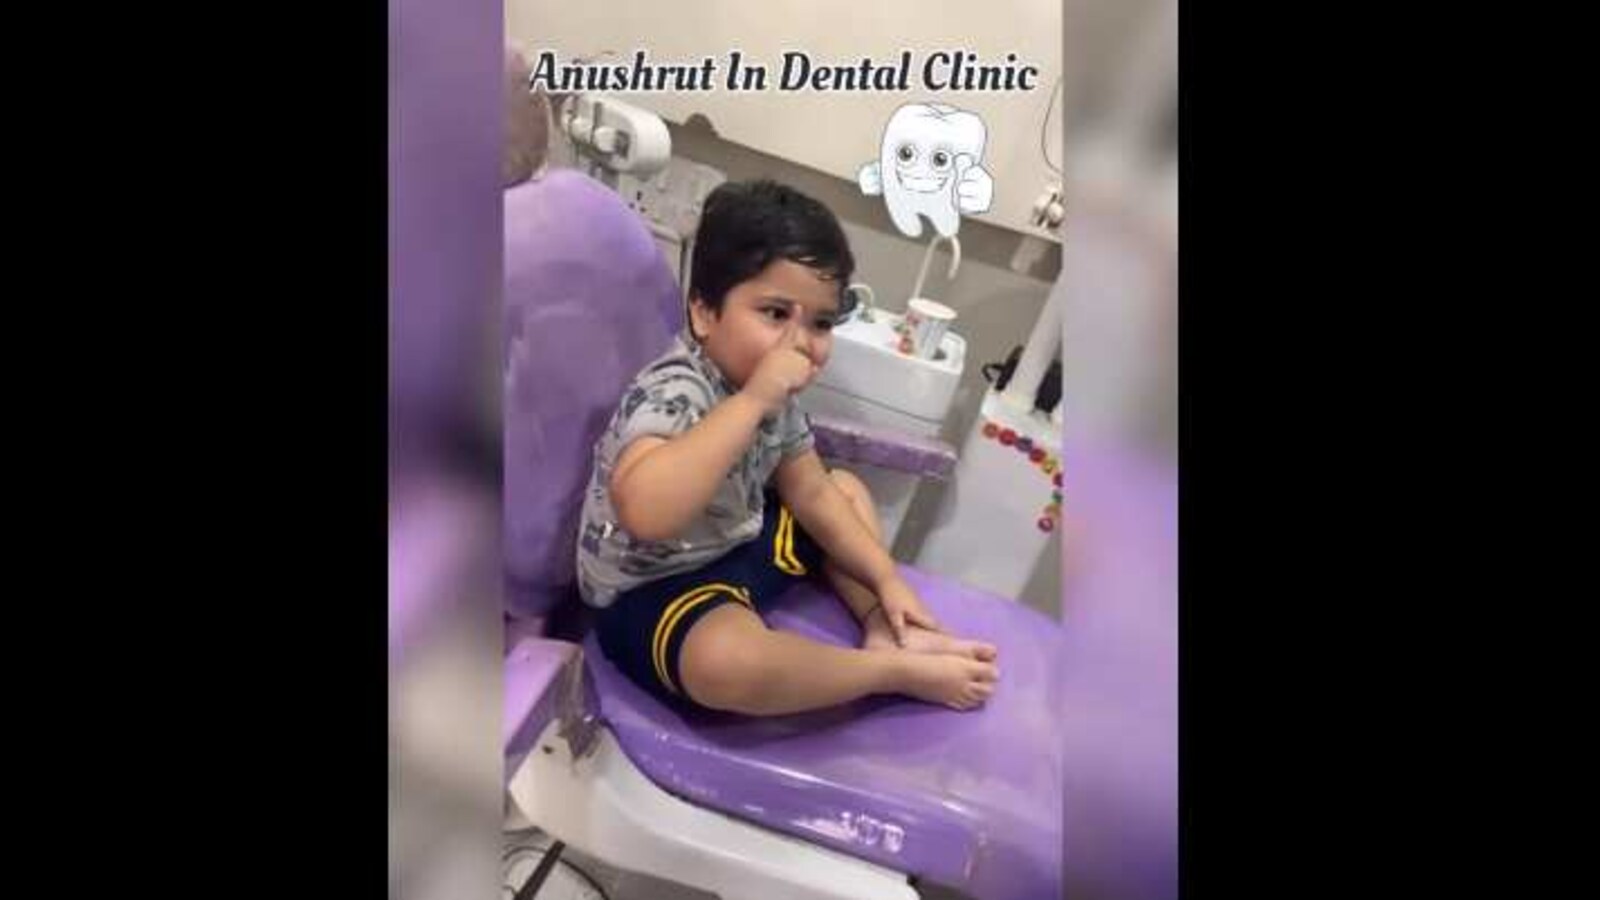 Anushrut visits a dentist, the following is hilarious